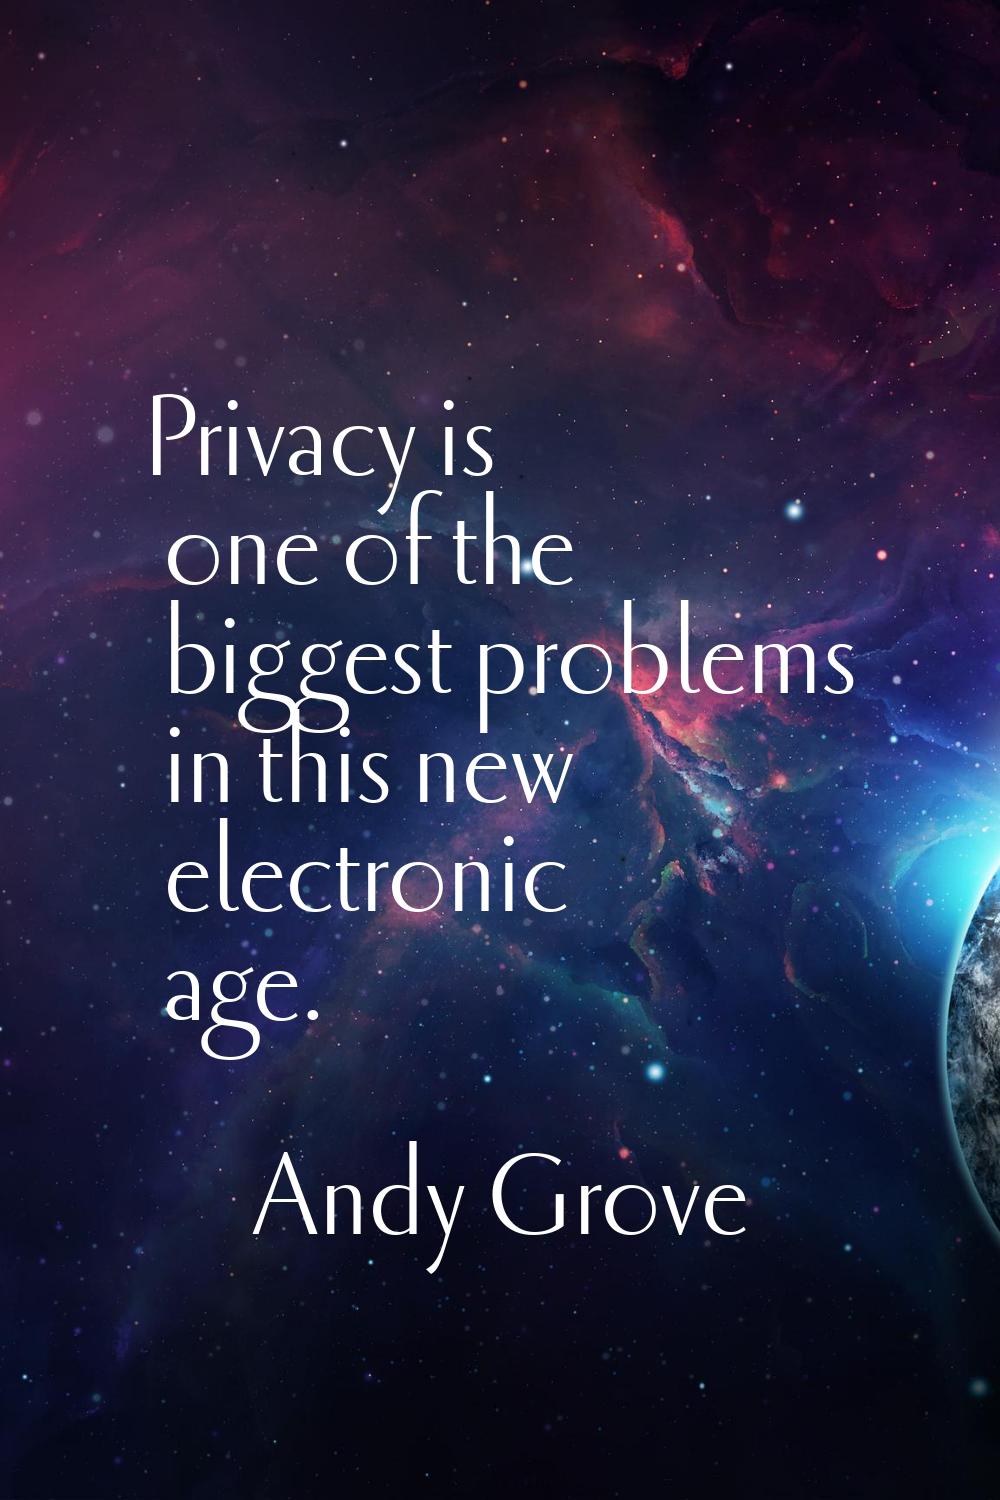 Privacy is one of the biggest problems in this new electronic age.